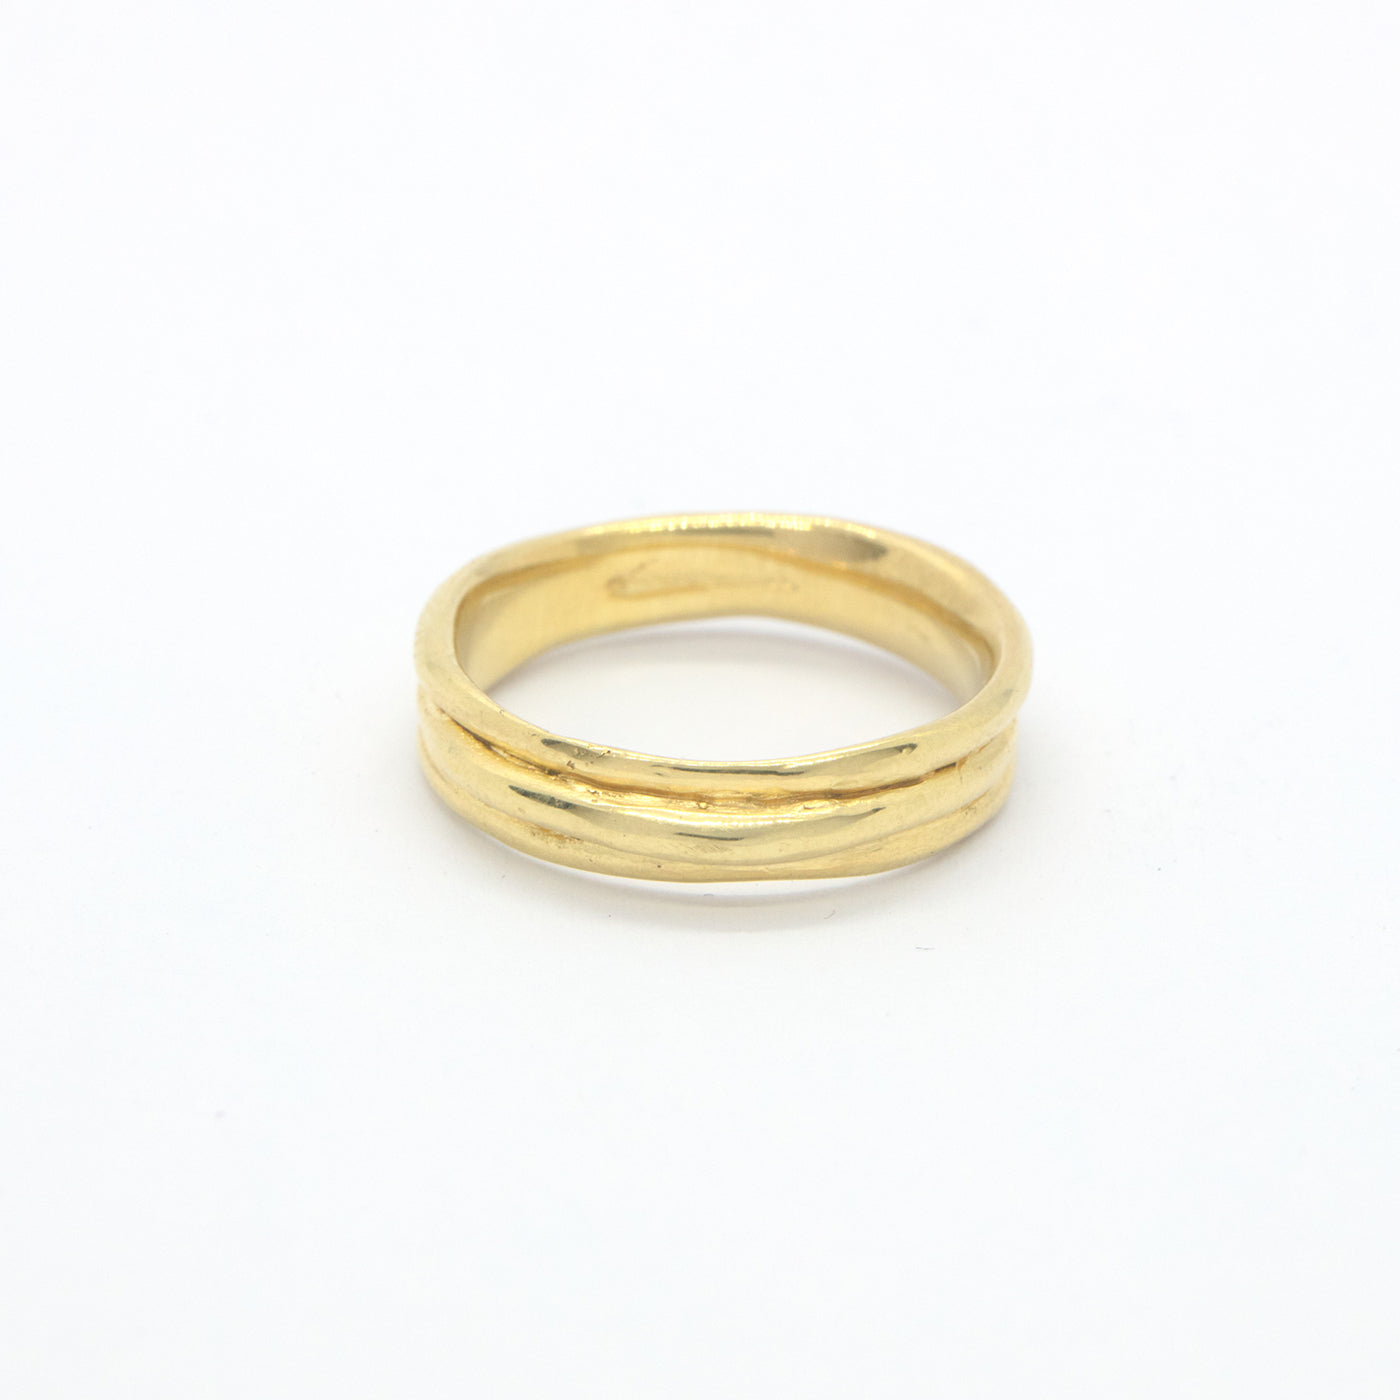 Ring Embrace Wedding Band for Her 14ct or 18ct yellow gold product side view innan jewellery independent atelier berlin